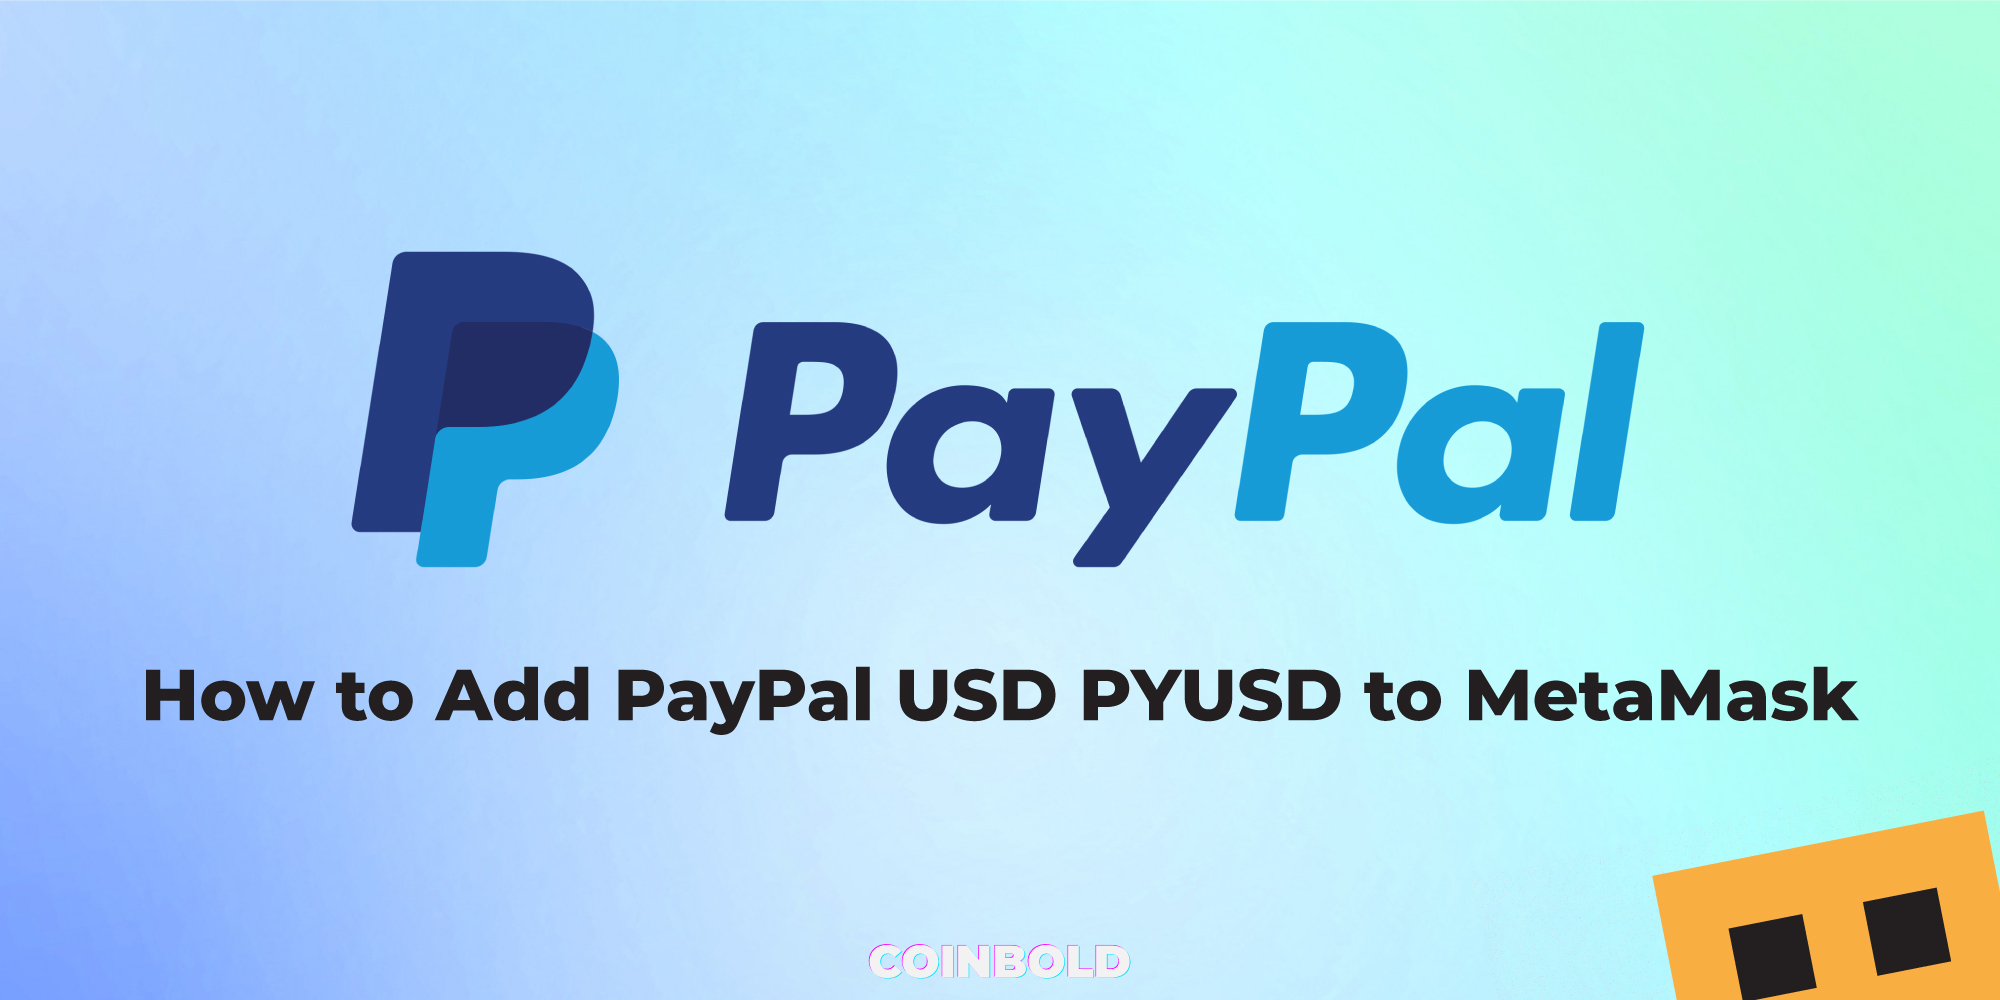 How to Add PayPal USD PYUSD to MetaMask